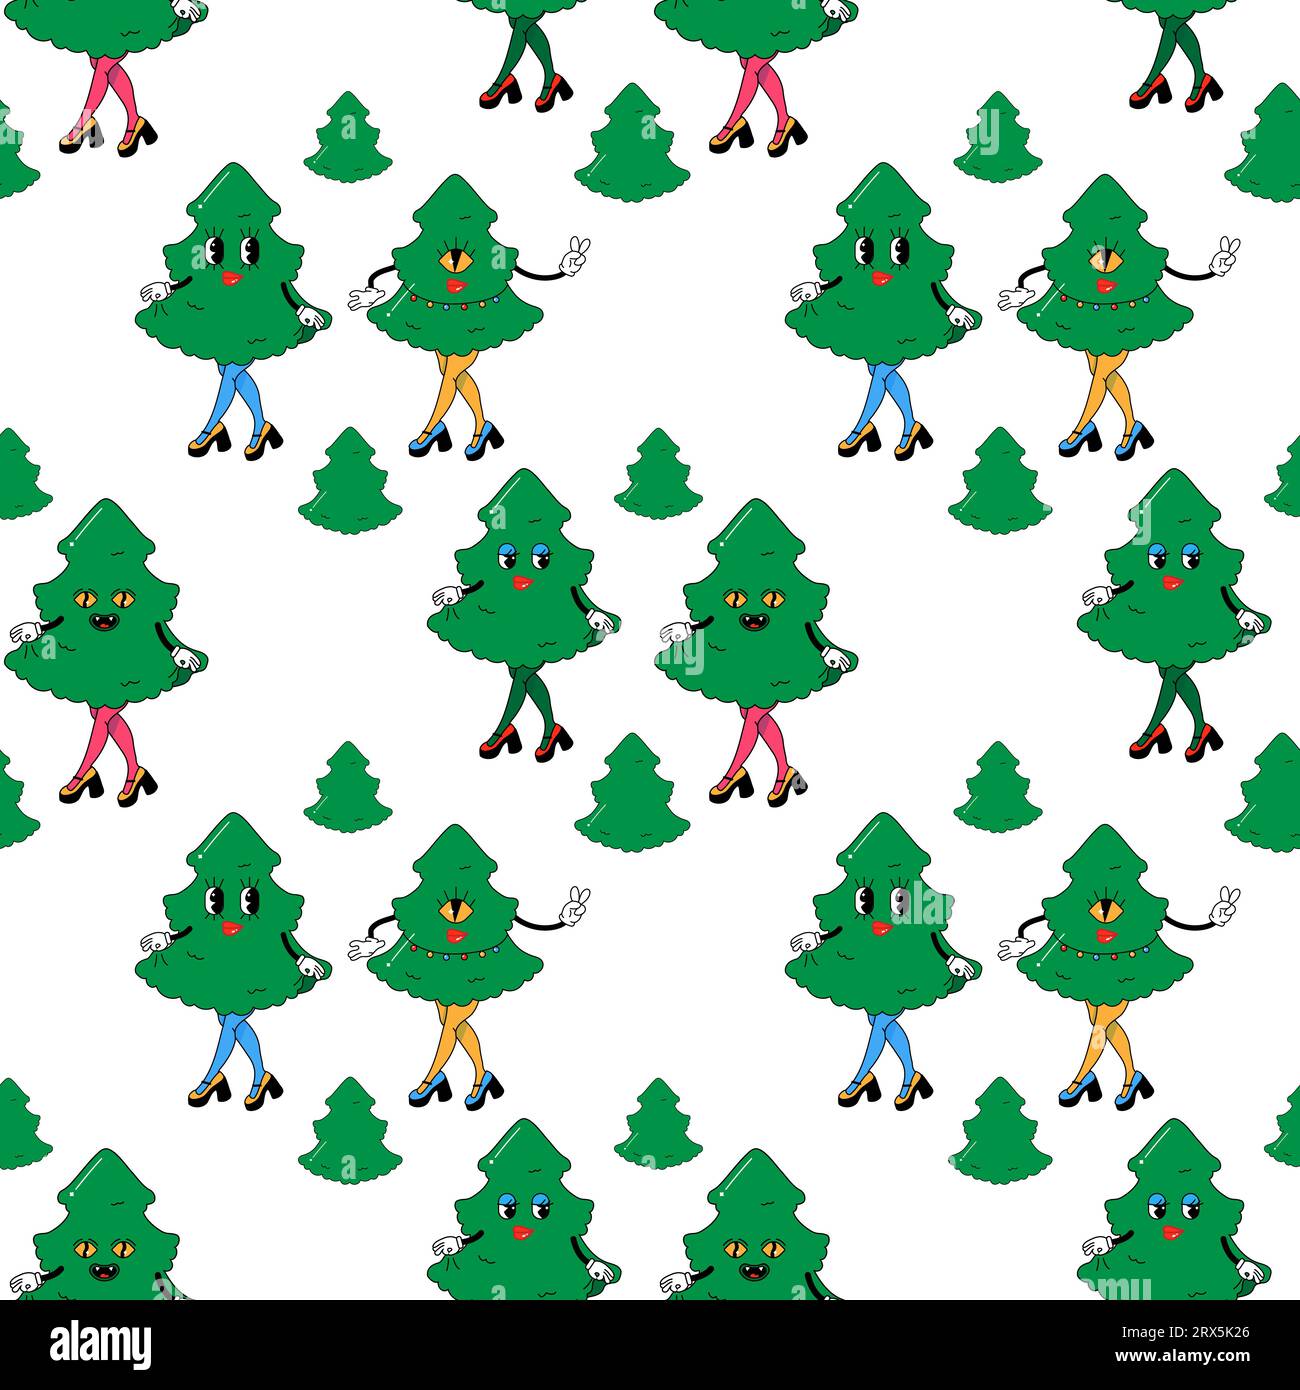 Christmas tree. In psychedelic groovy style. Seamless pattern on fabric, wrapping paper, bedding, clothing. Stock Vector